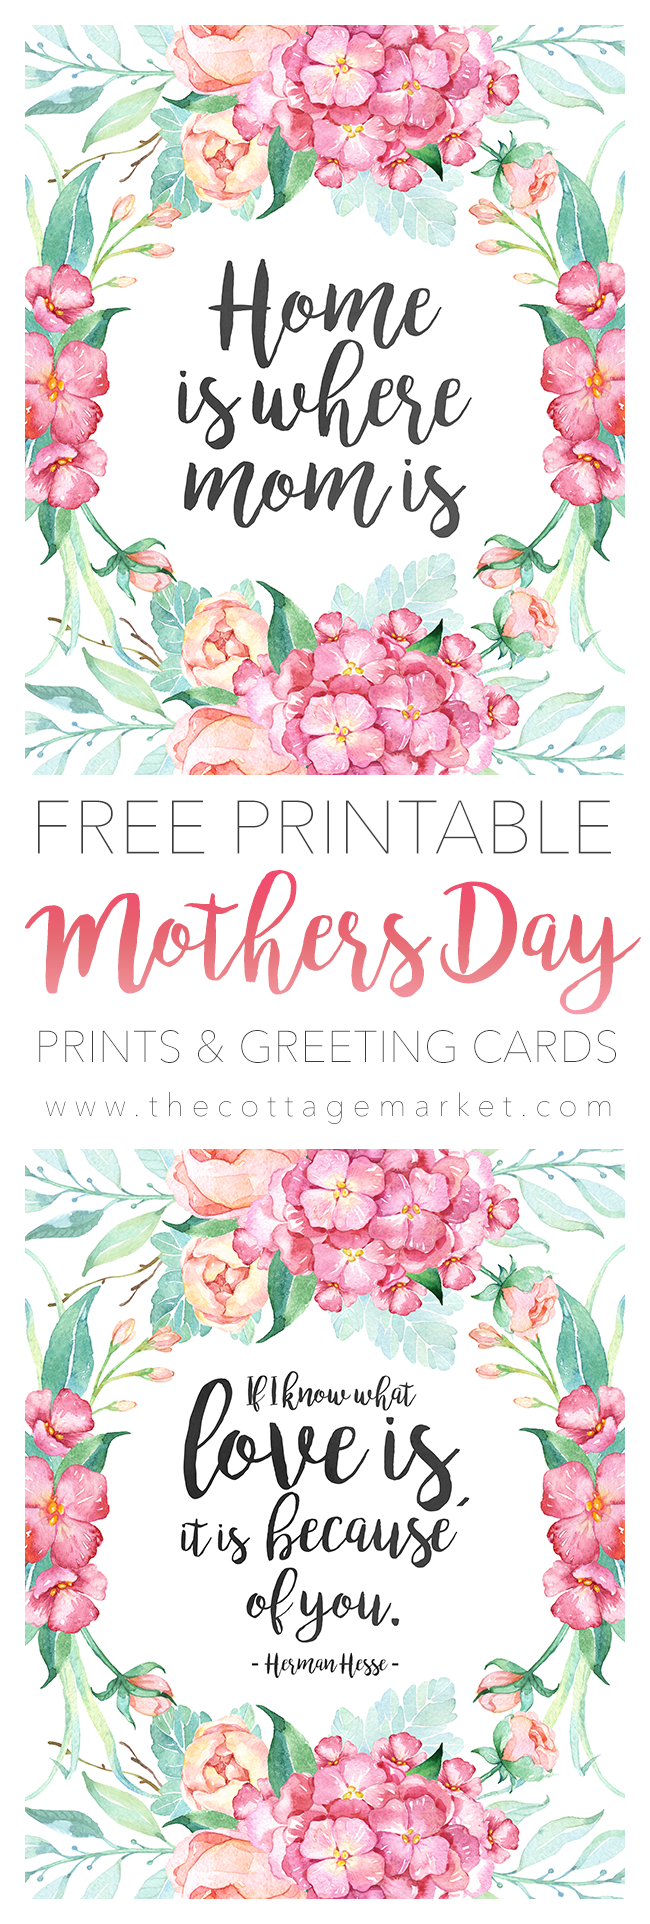 Free Printable Mother s Day Prints And Cards The Cottage Market